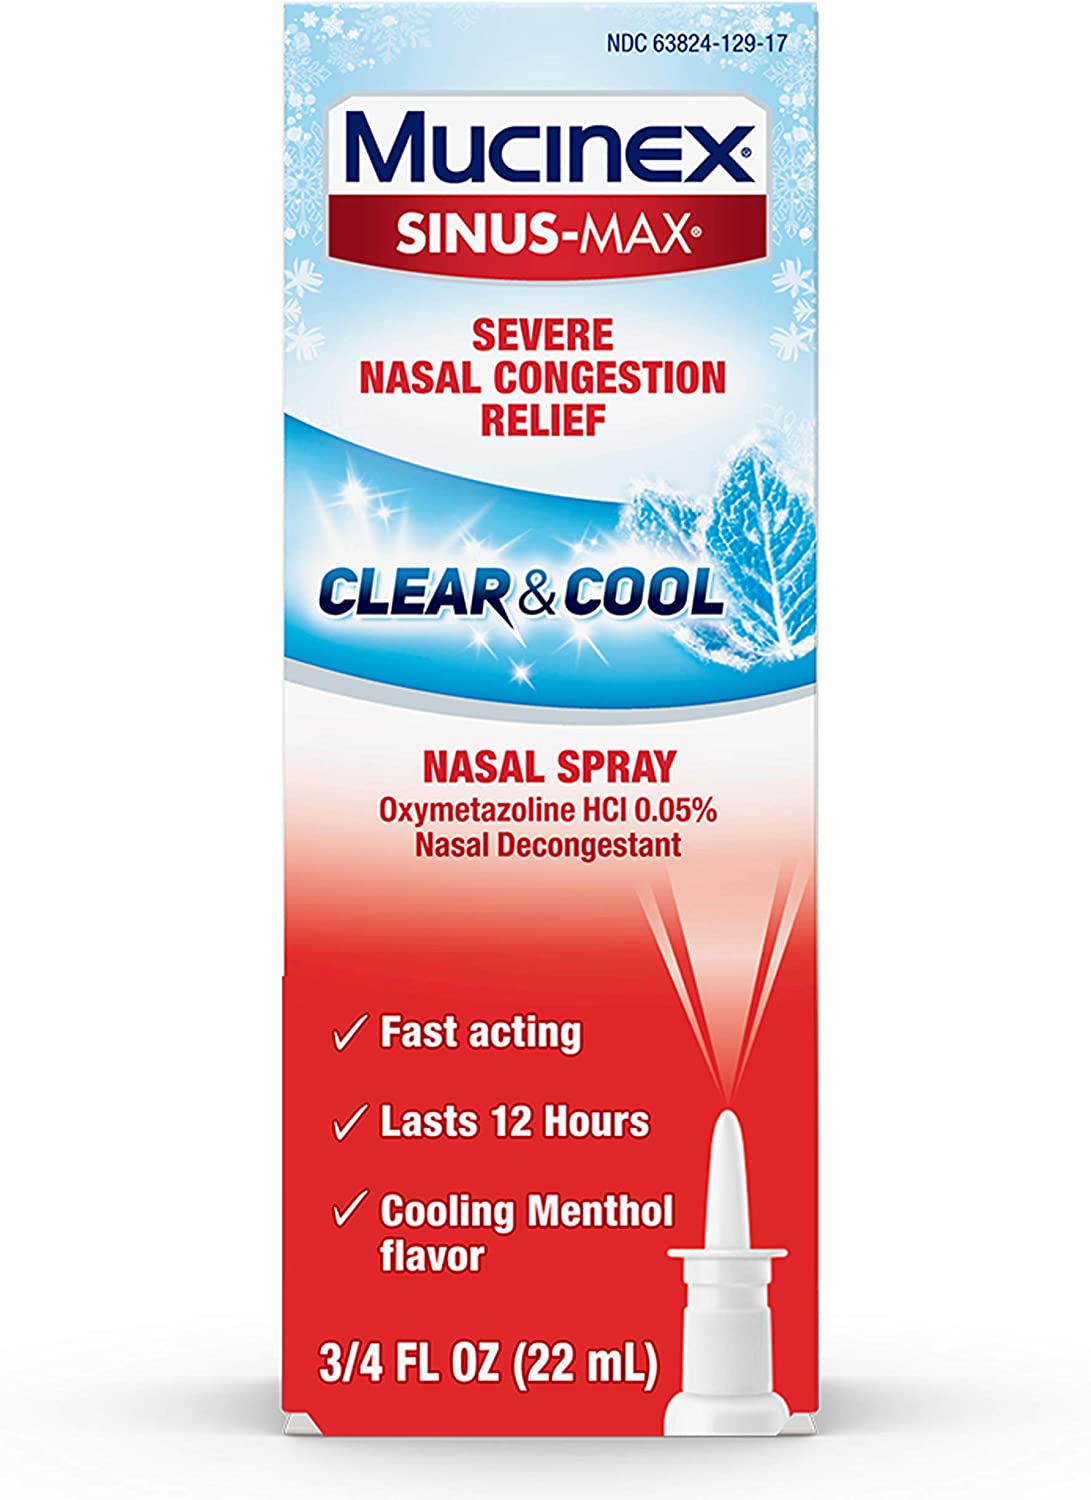 0.75-Oz Mucinex Sinus-Max Severe Nasal Congestion Relief Clear & Cool Nasal Spray $6.28 w/ S&S & More + Free Shipping w/ Prime or on $25+